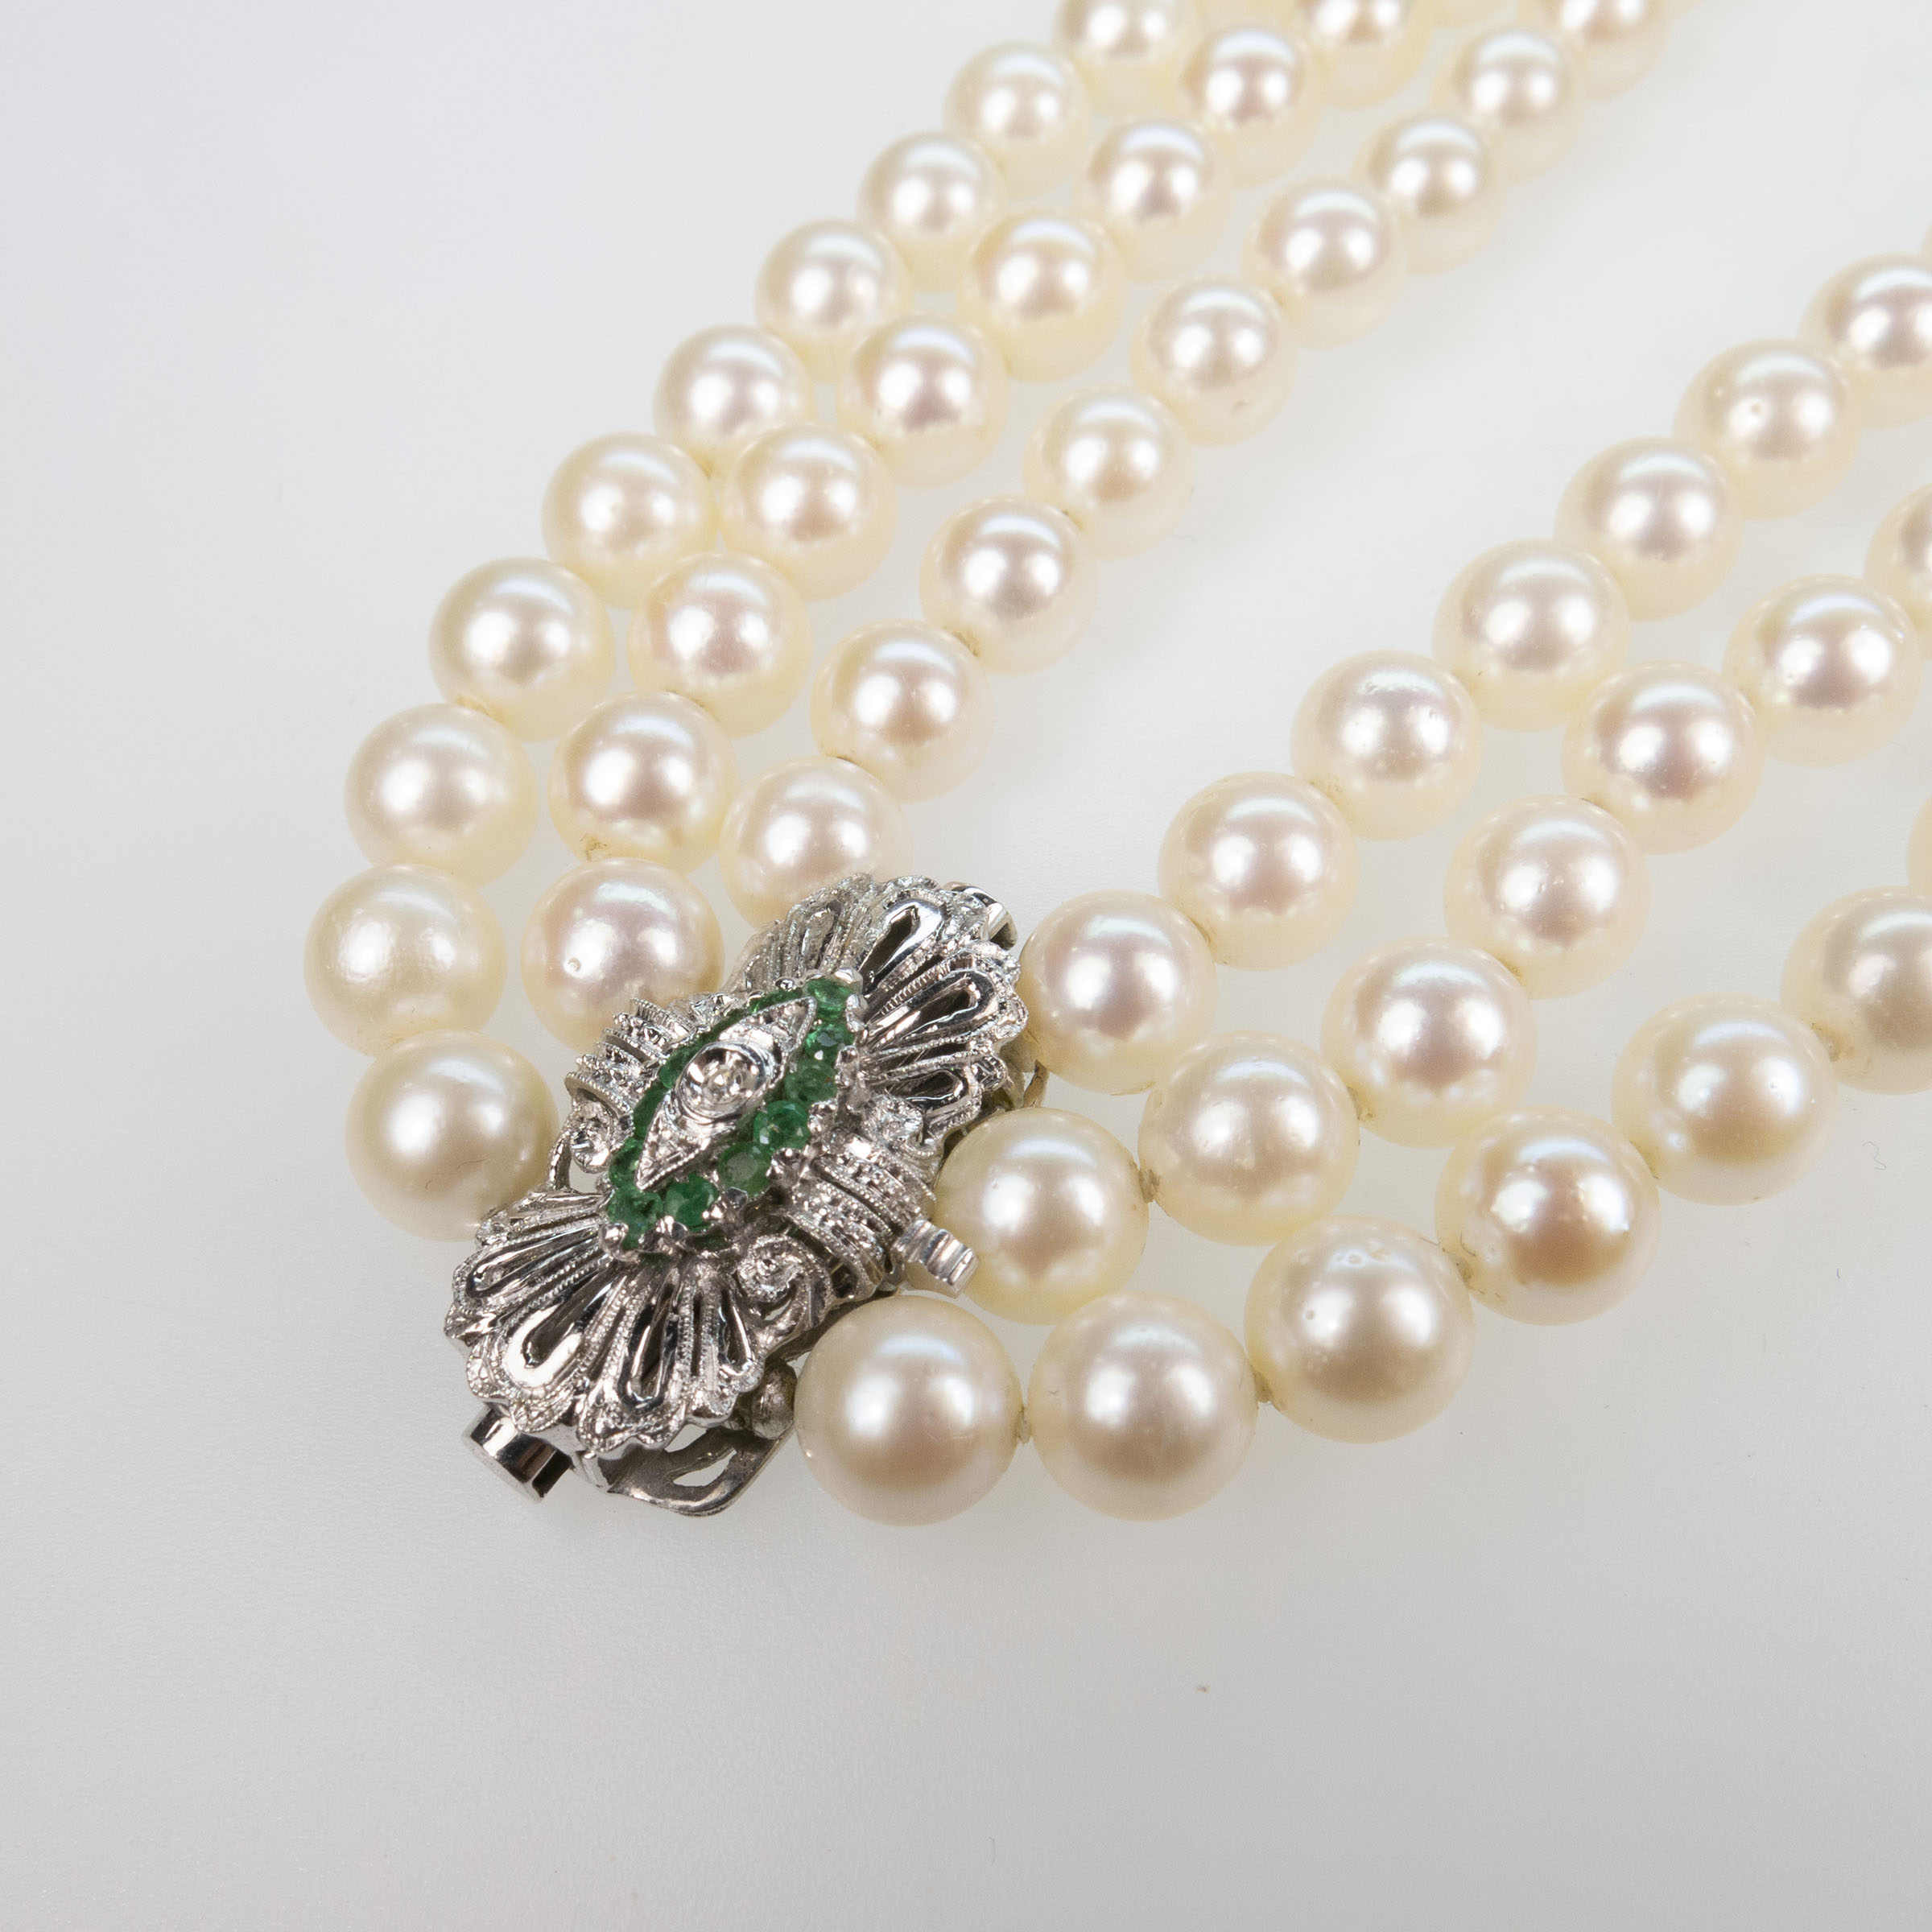 Triple Strand Cultured Pearl Necklace